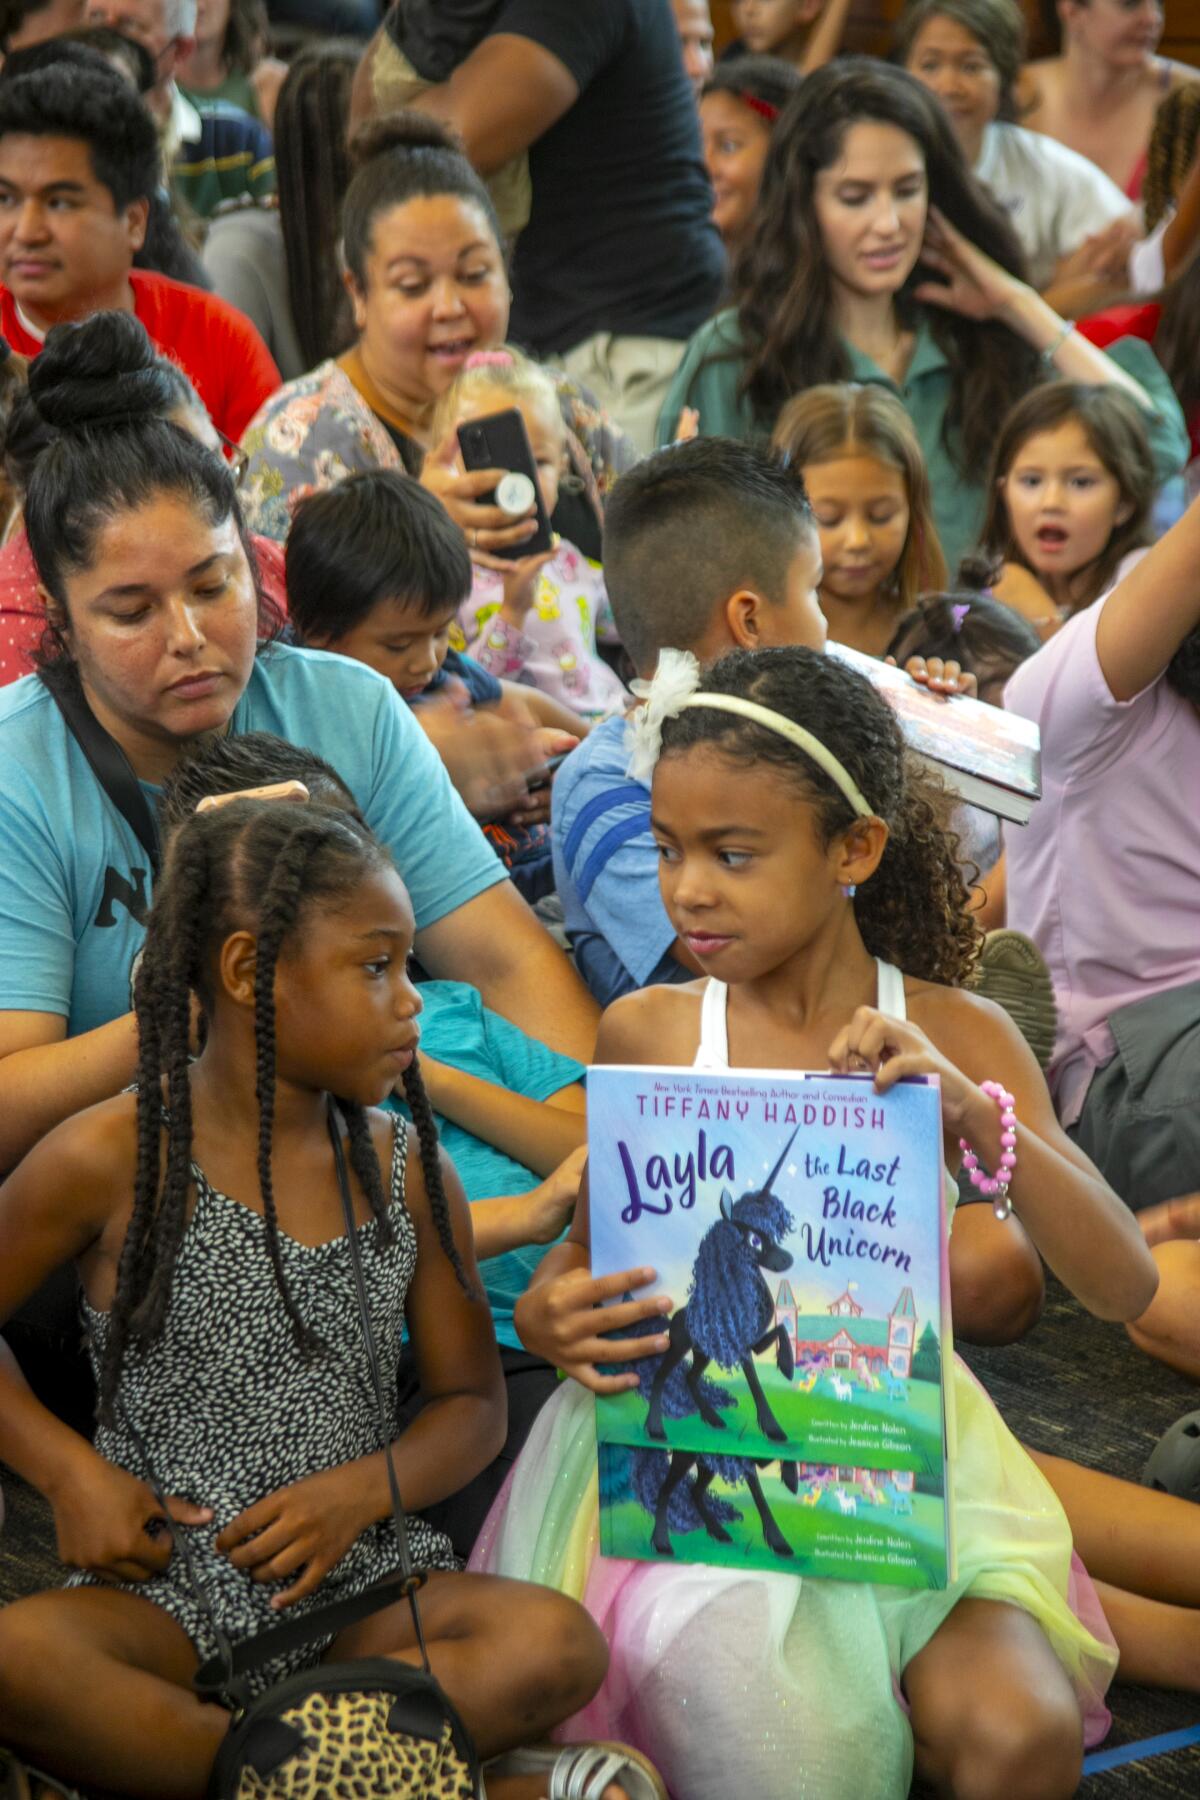 Fans gather at the Tustin Library to meet the author of "Layla, the Last Black Unicorn."